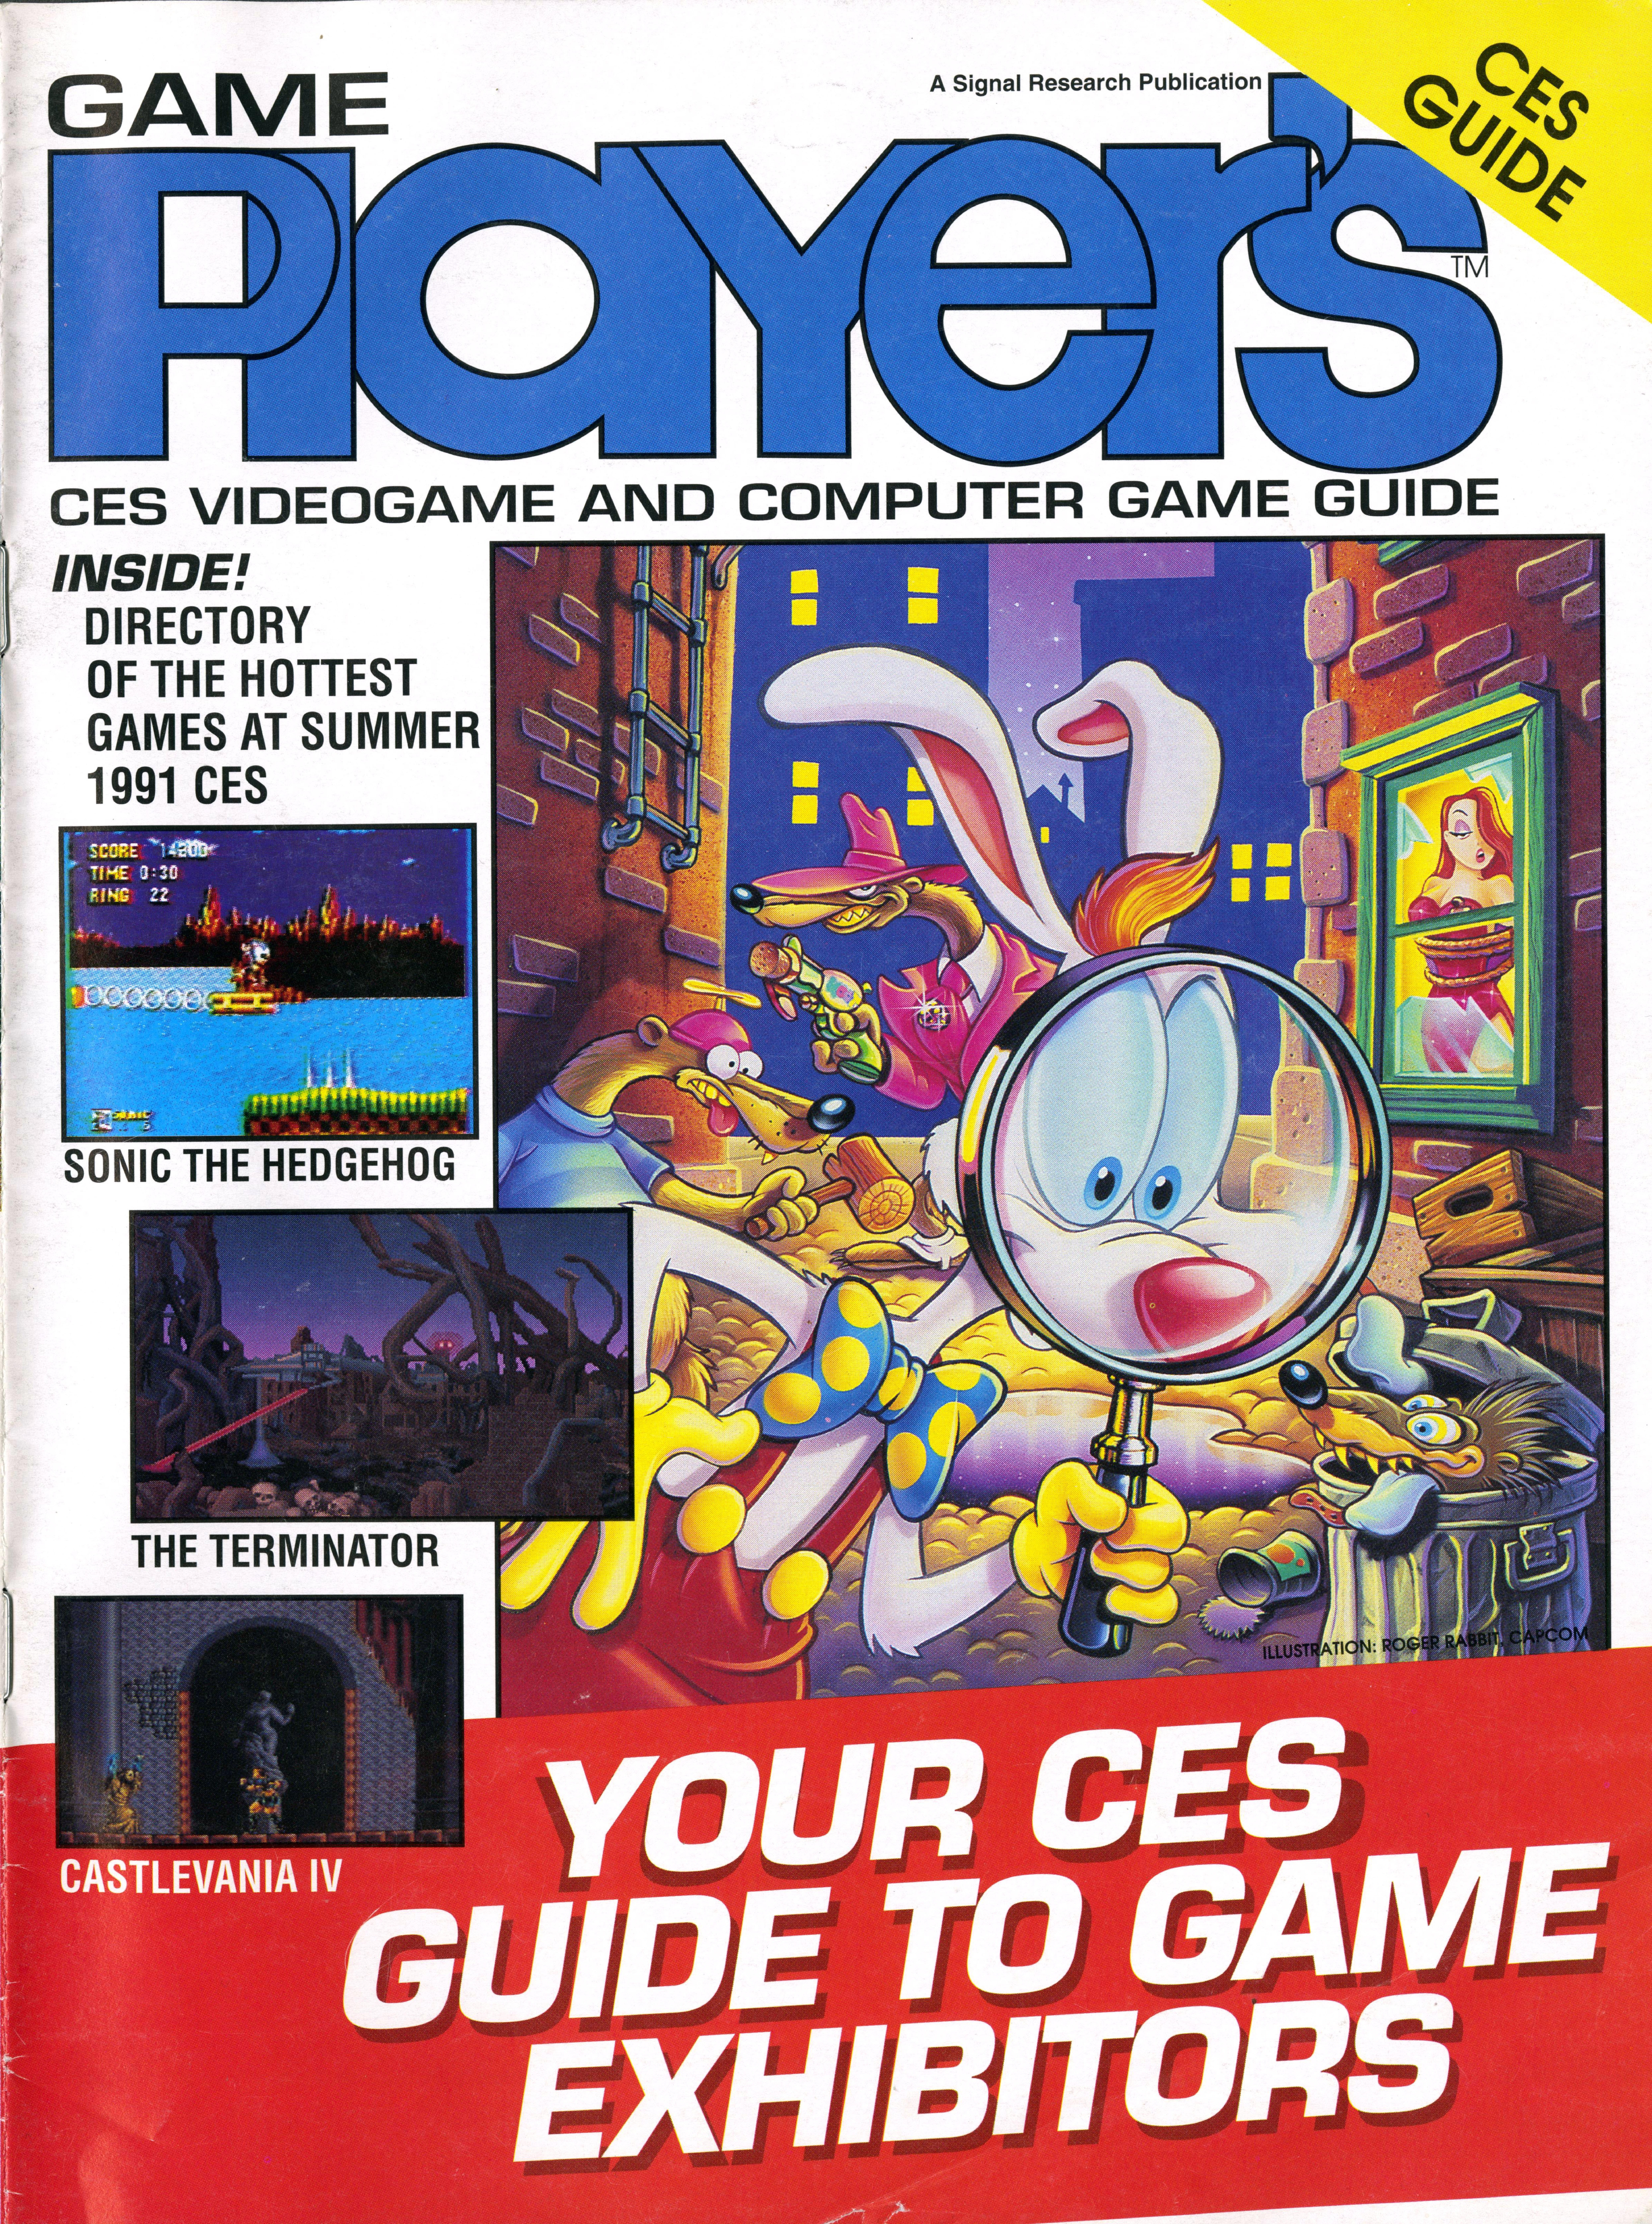 GamePlayers US SCES1991.pdf